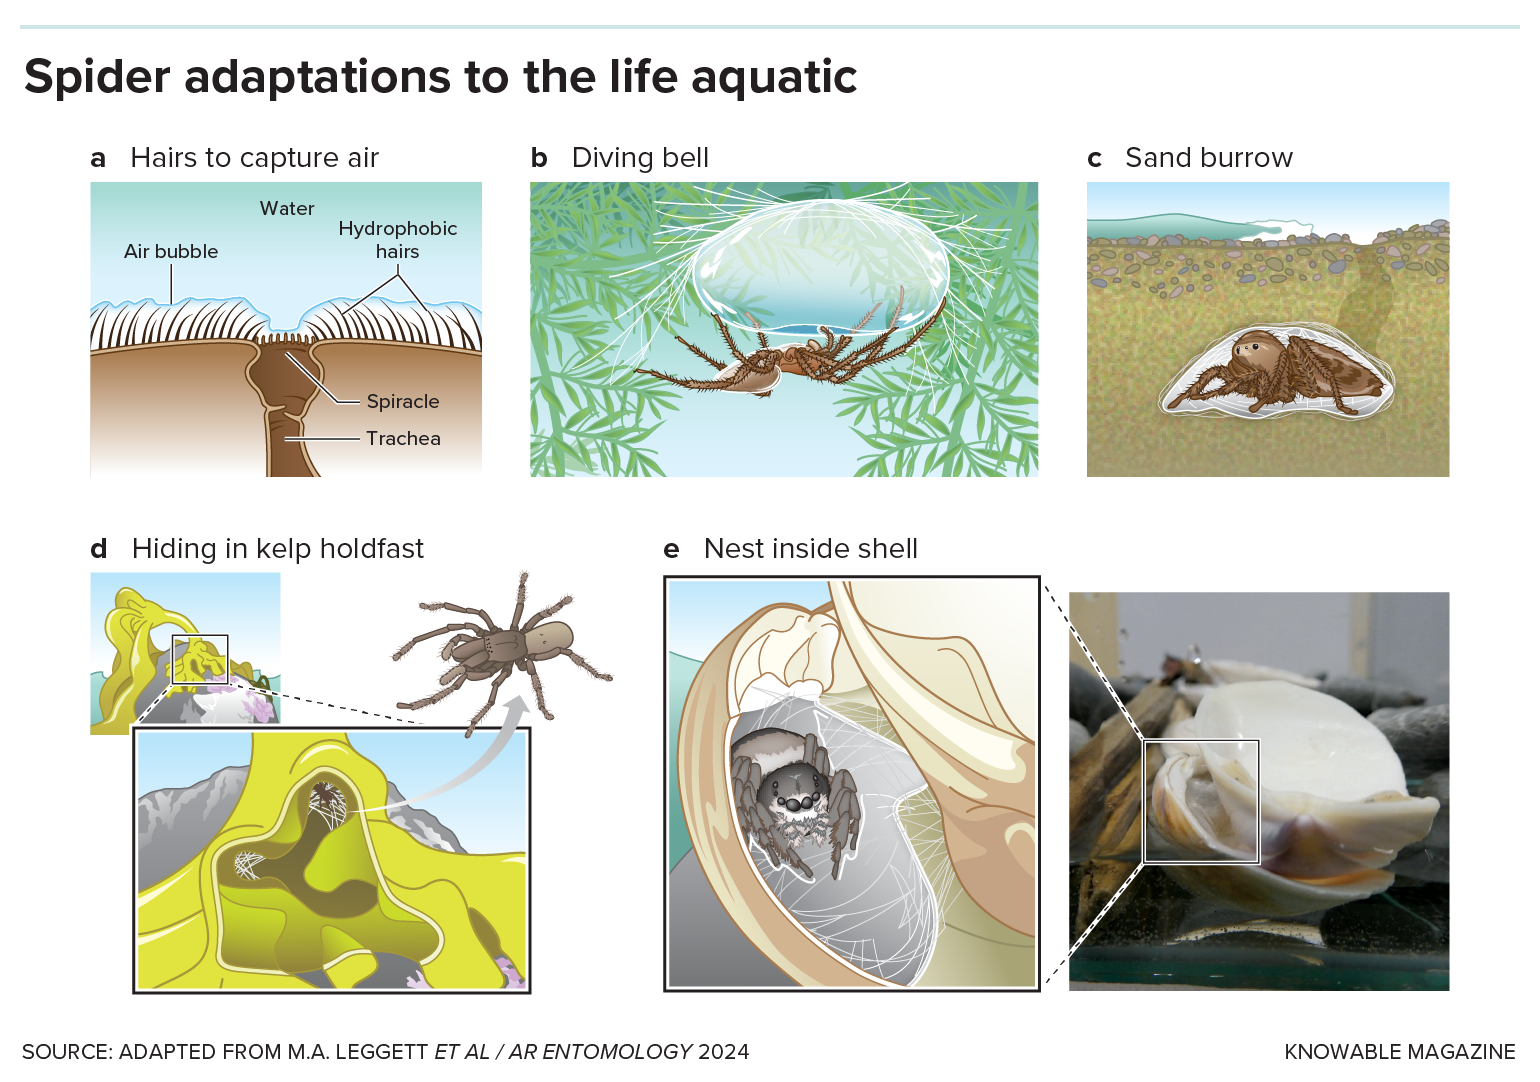 A graphic shows drawings of different ways spiders have adapted to live in or near water.